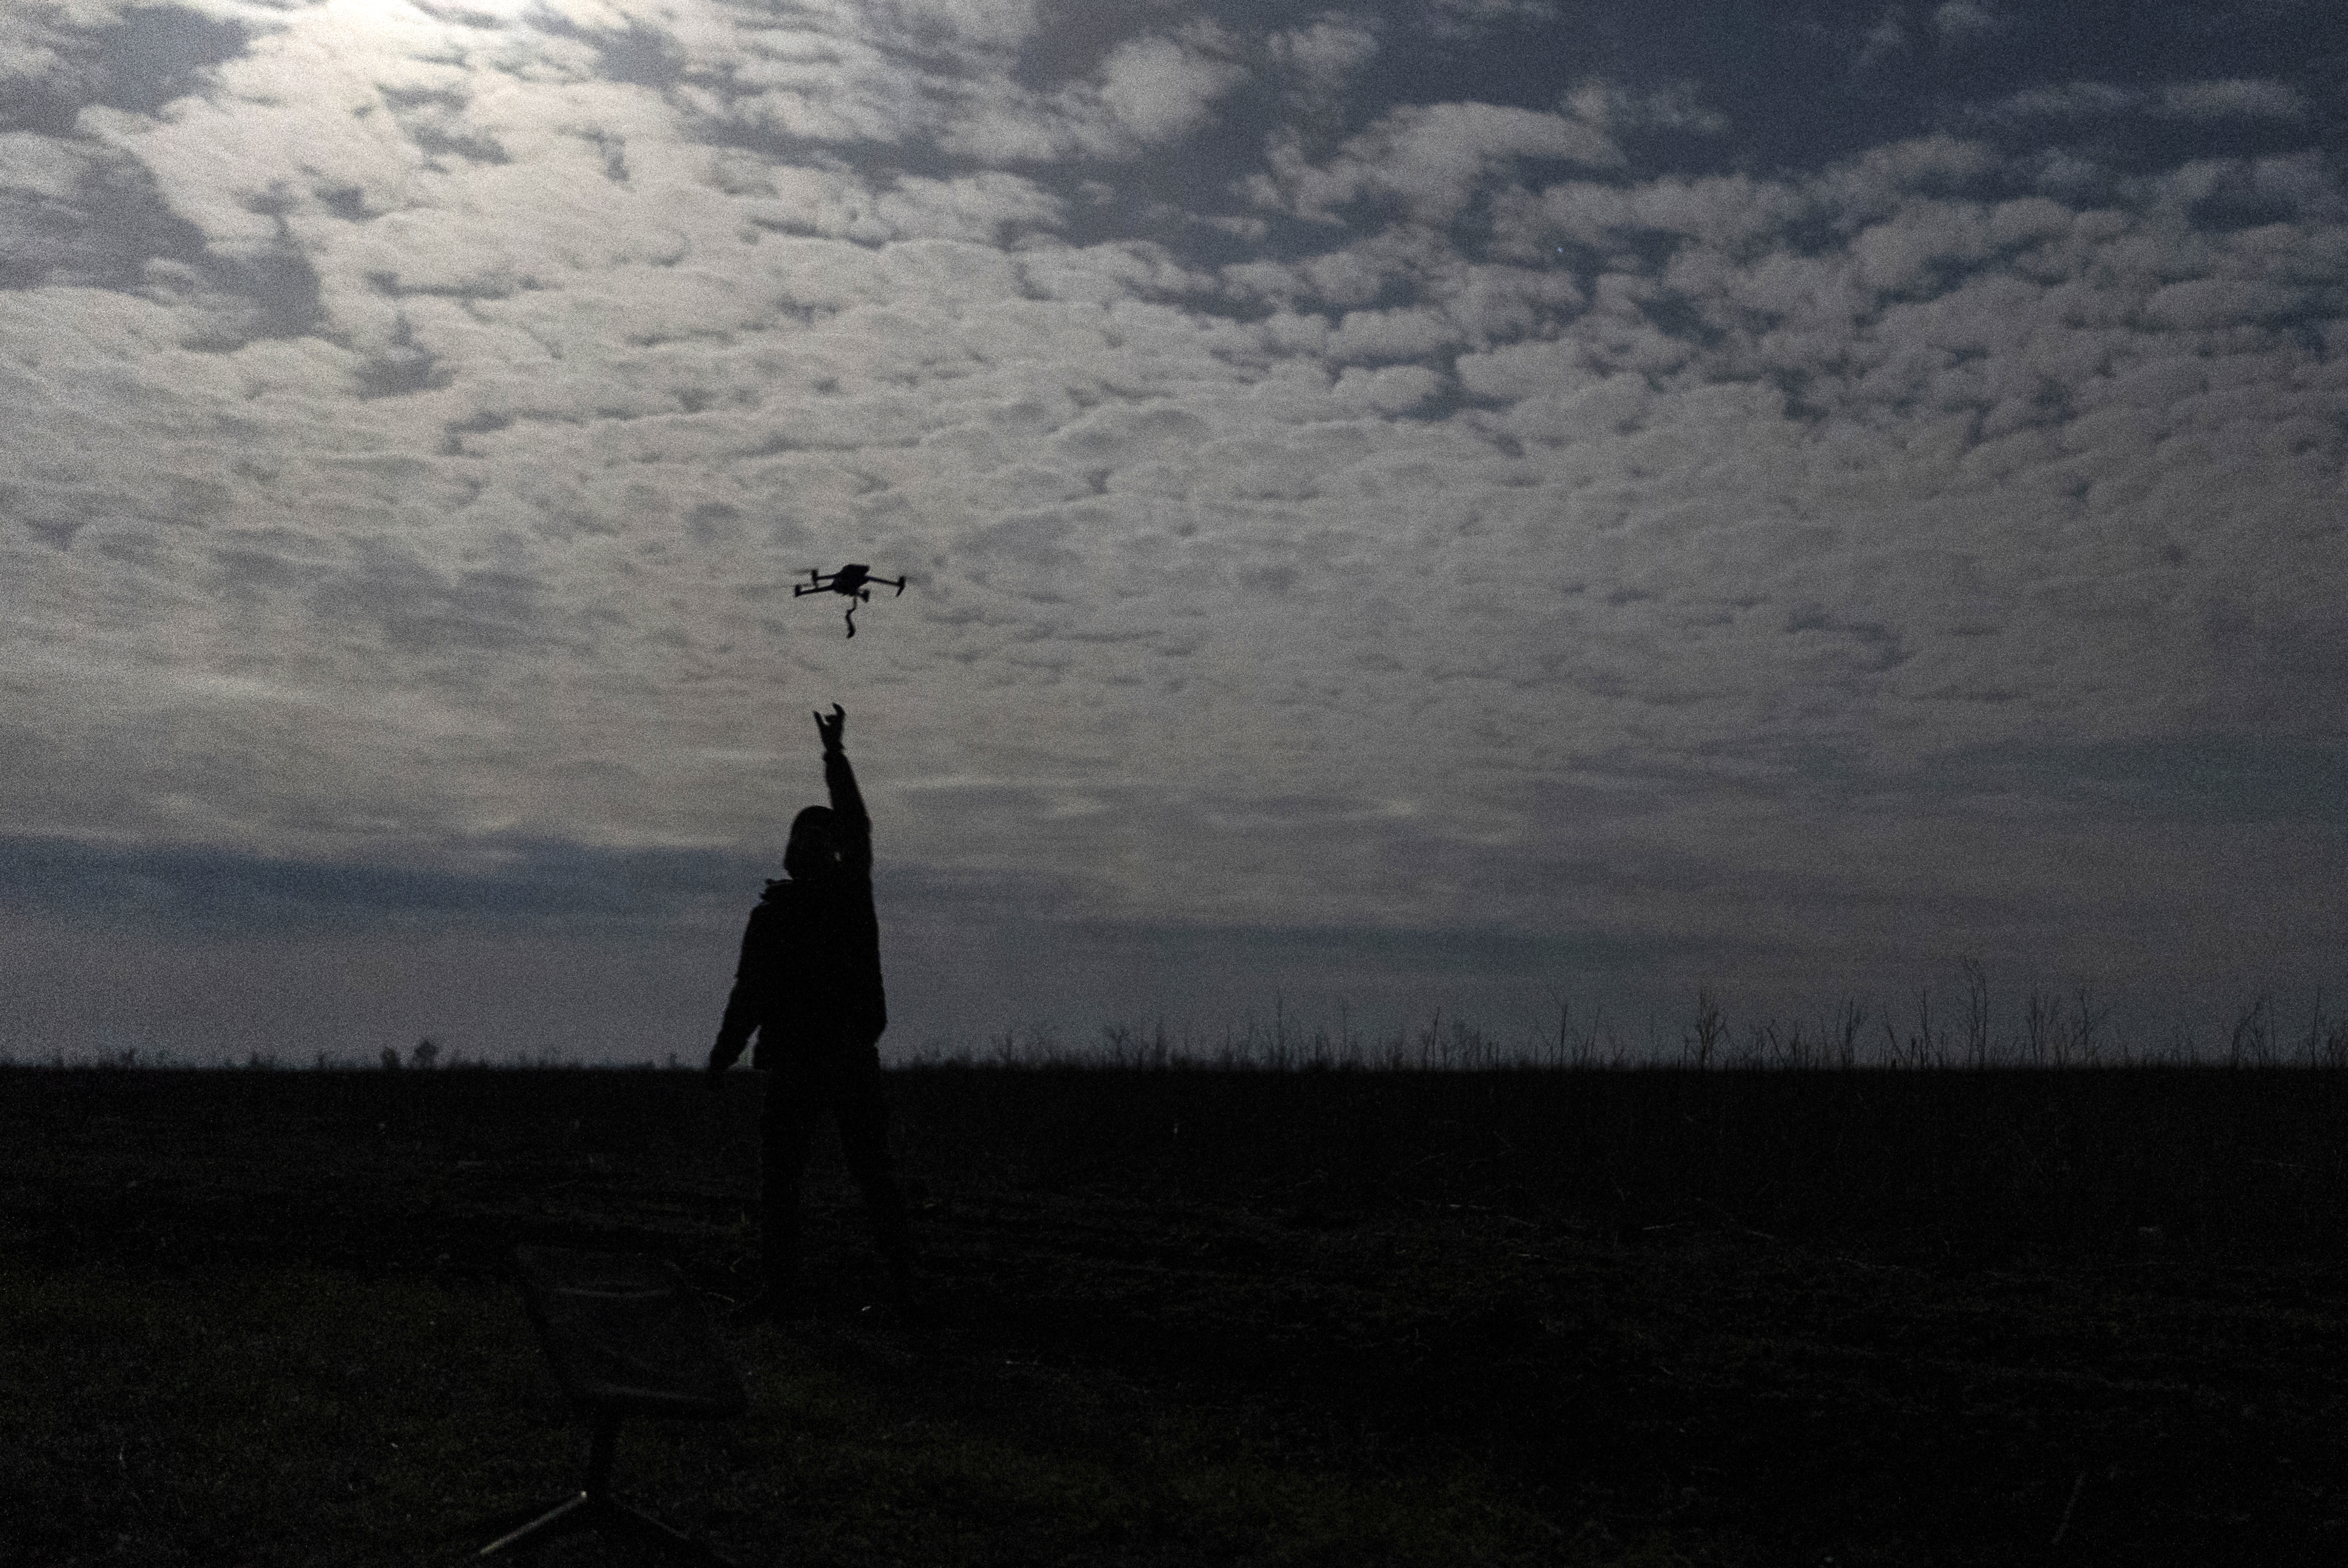 A Ukrainian soldier catches a drone on the eastern frontline. he is silhouetted against the sky and has his arm outstretched. The terrain in flat.